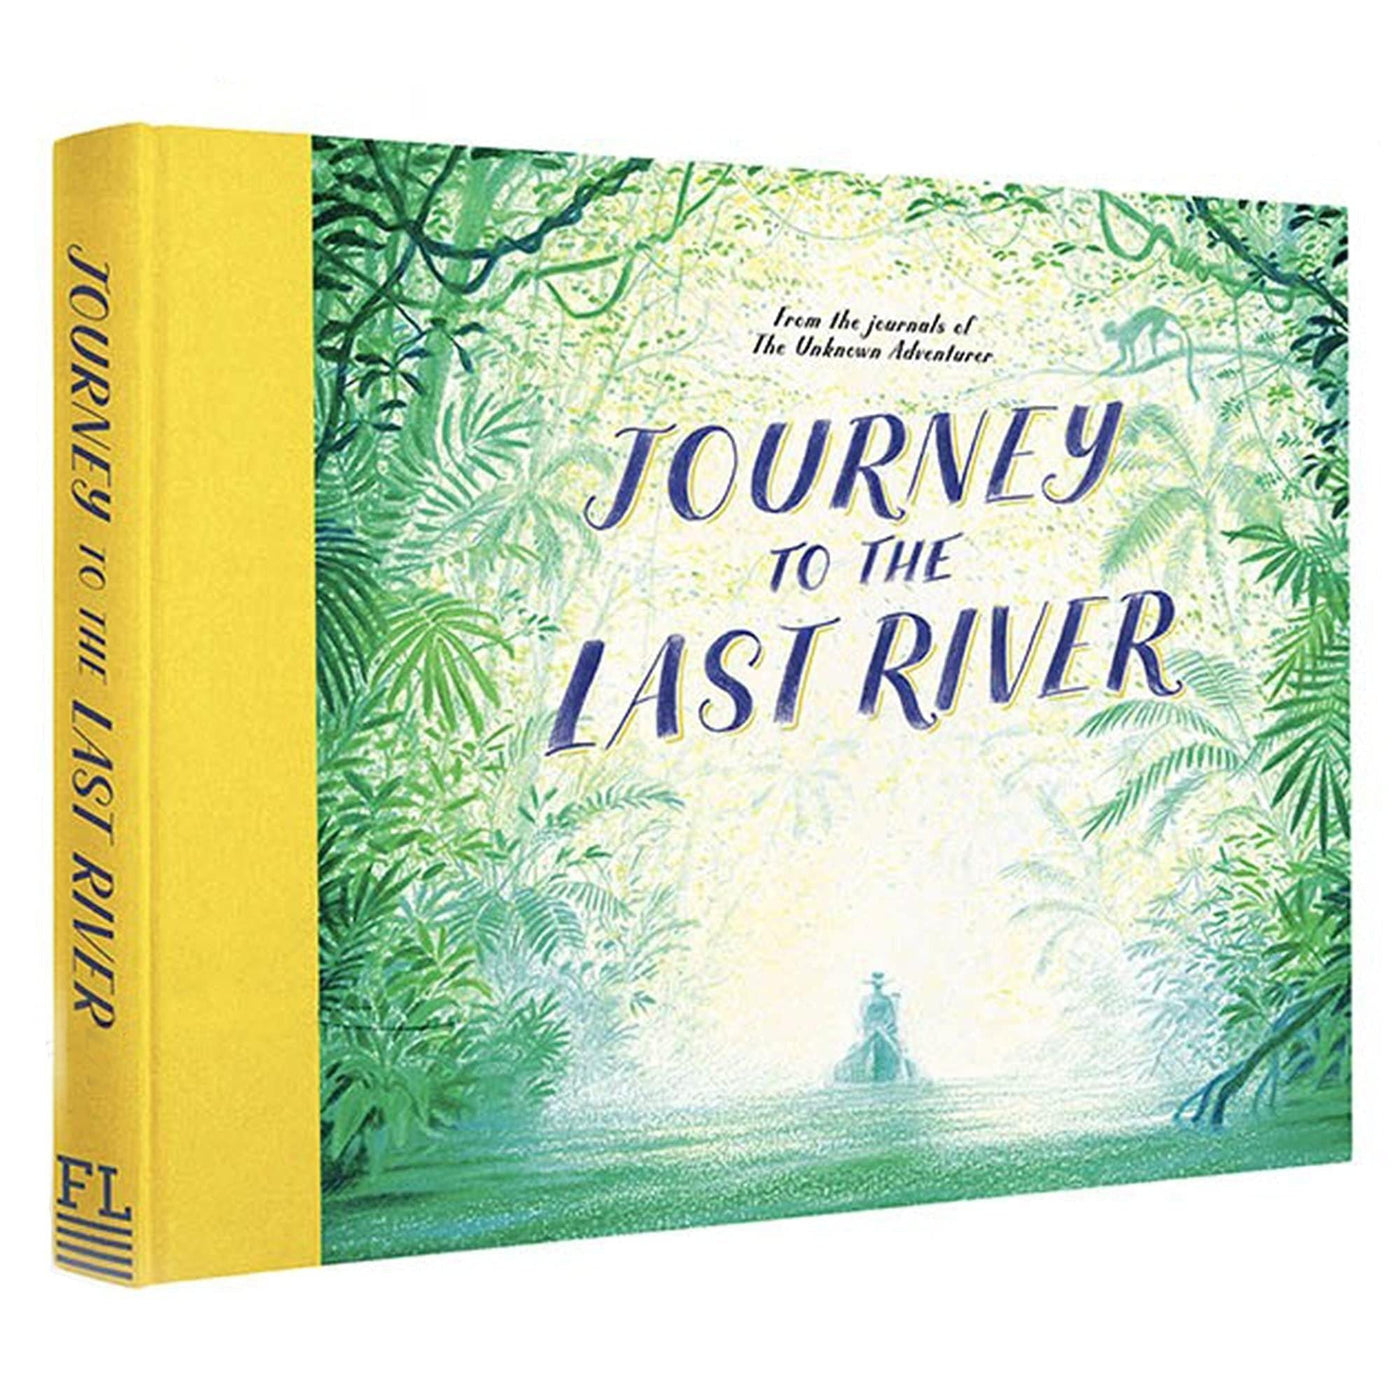 Journey To The Last River - Unknown Adventurer & Teddy Keen